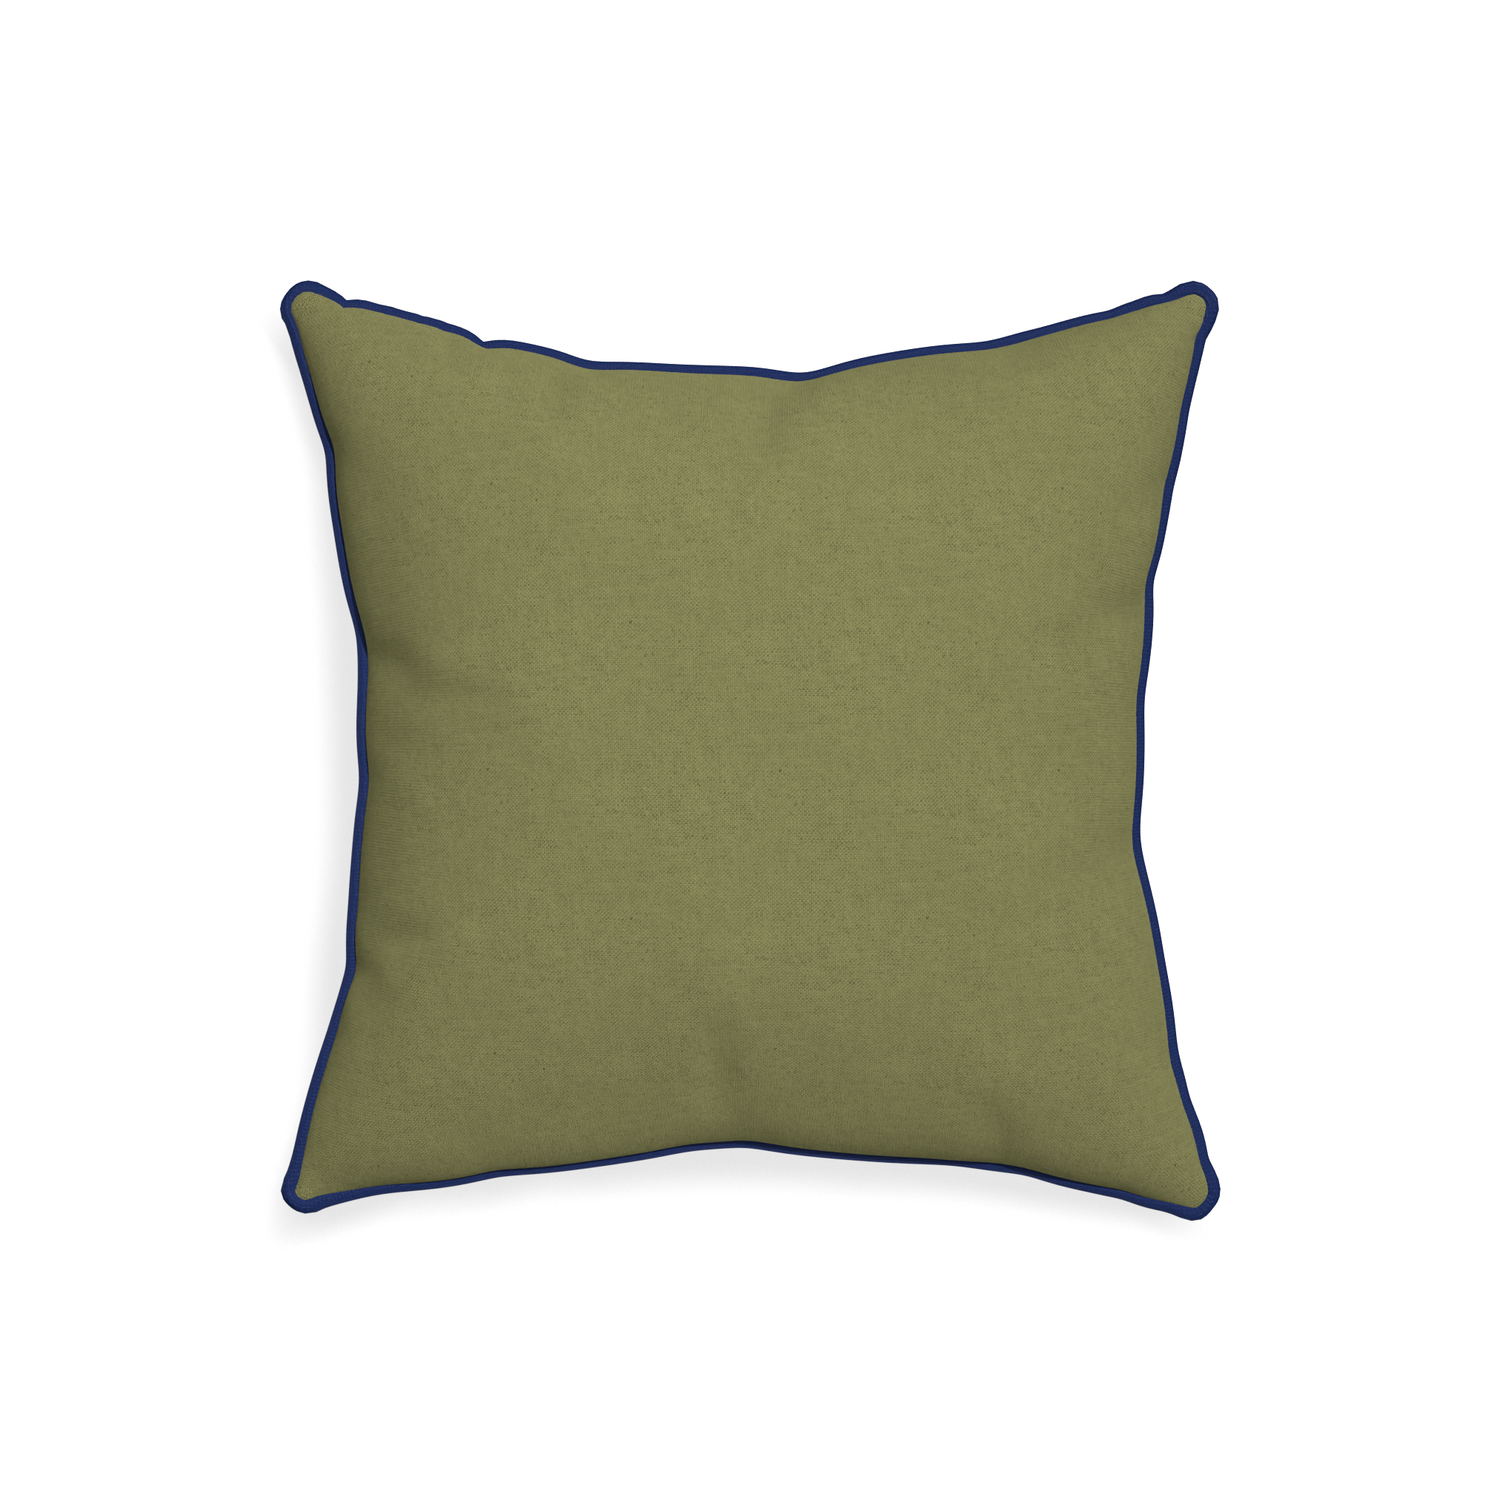 20-square moss custom moss greenpillow with midnight piping on white background